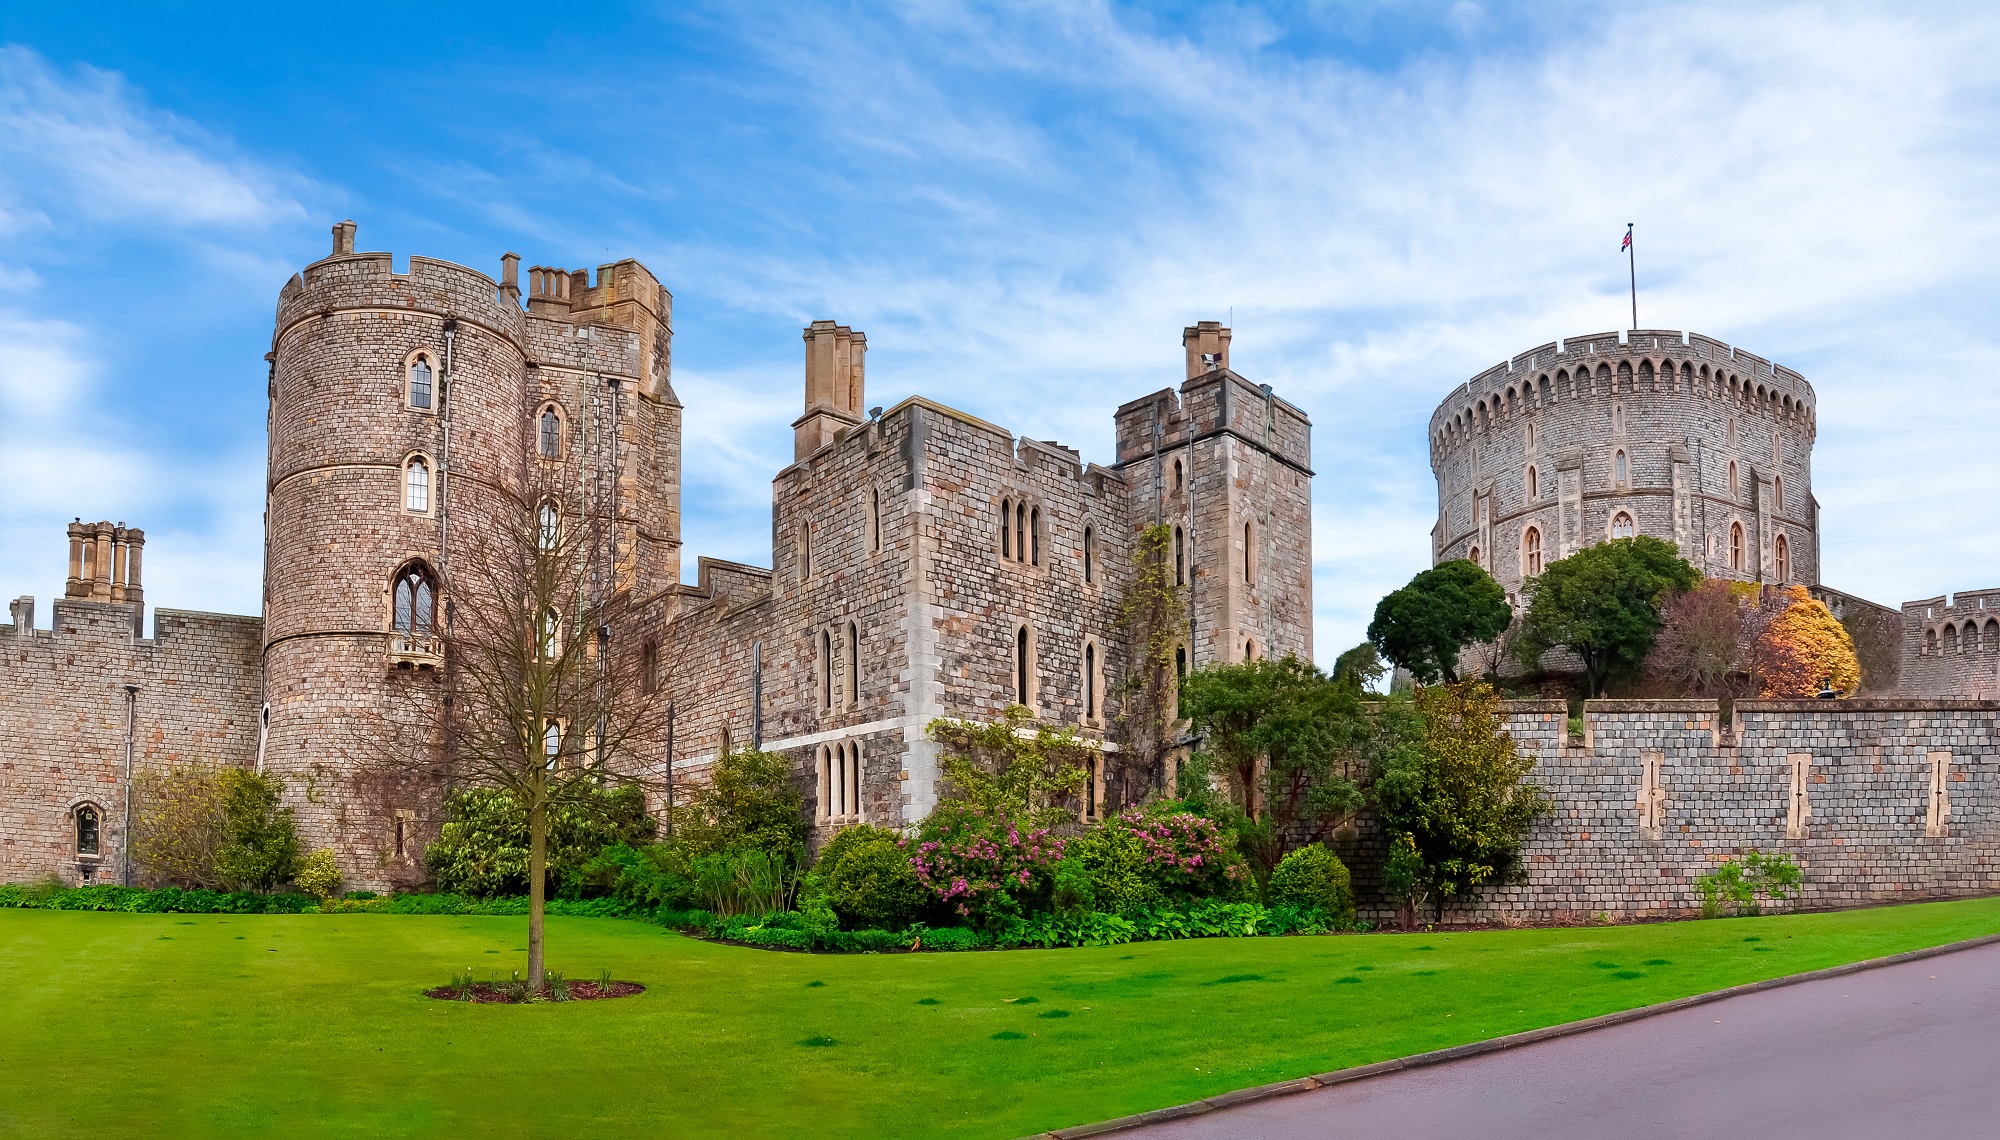 Walls and towers of Windsor Castle.